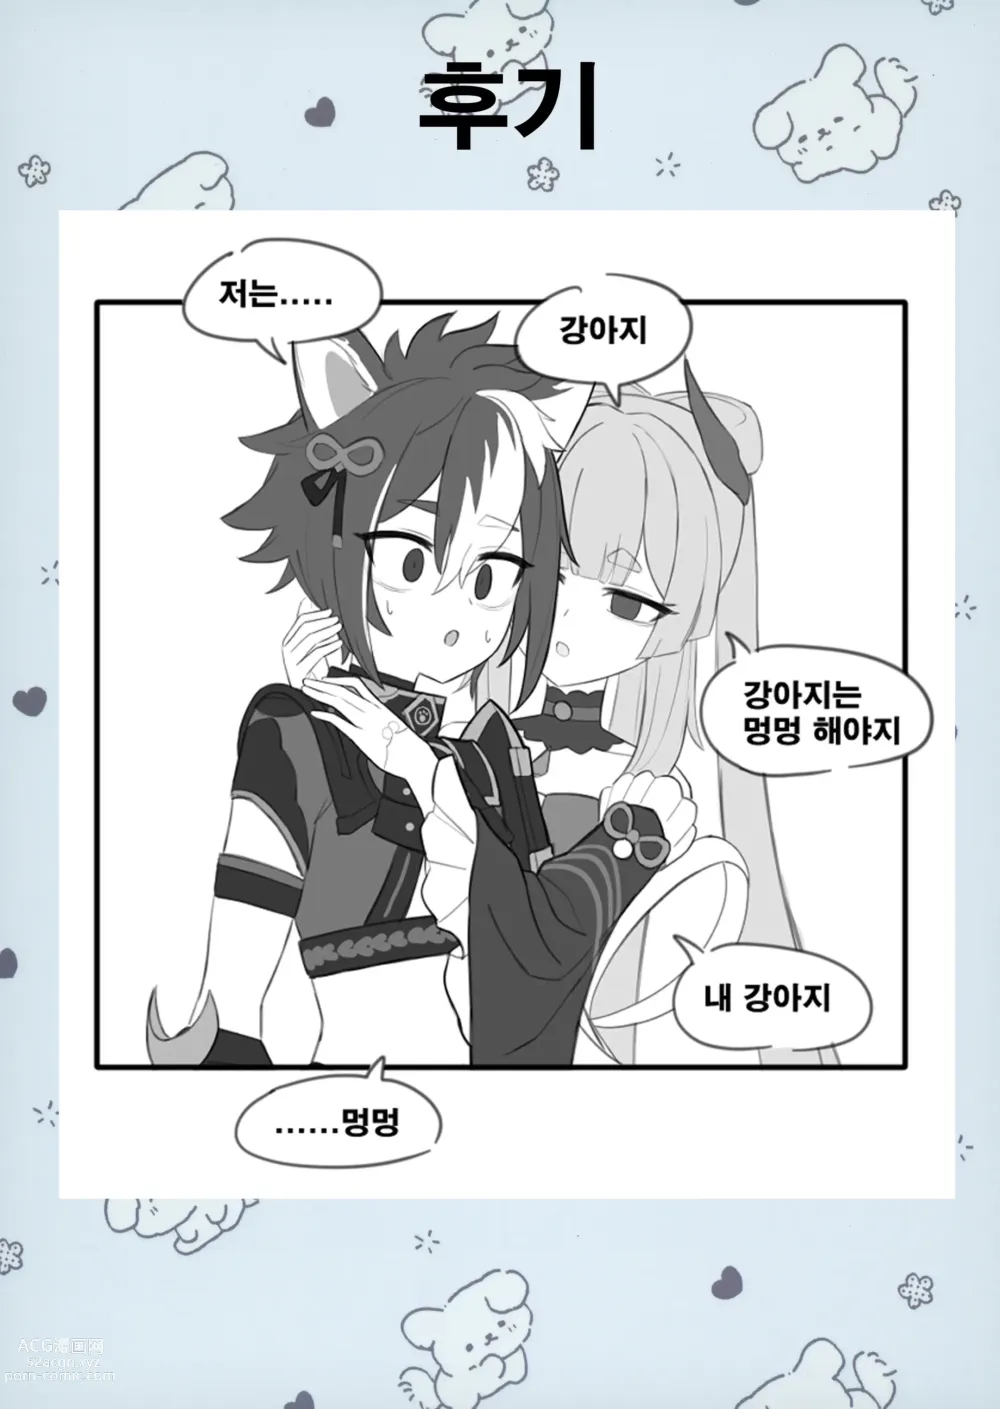 Page 23 of doujinshi 멍멍이